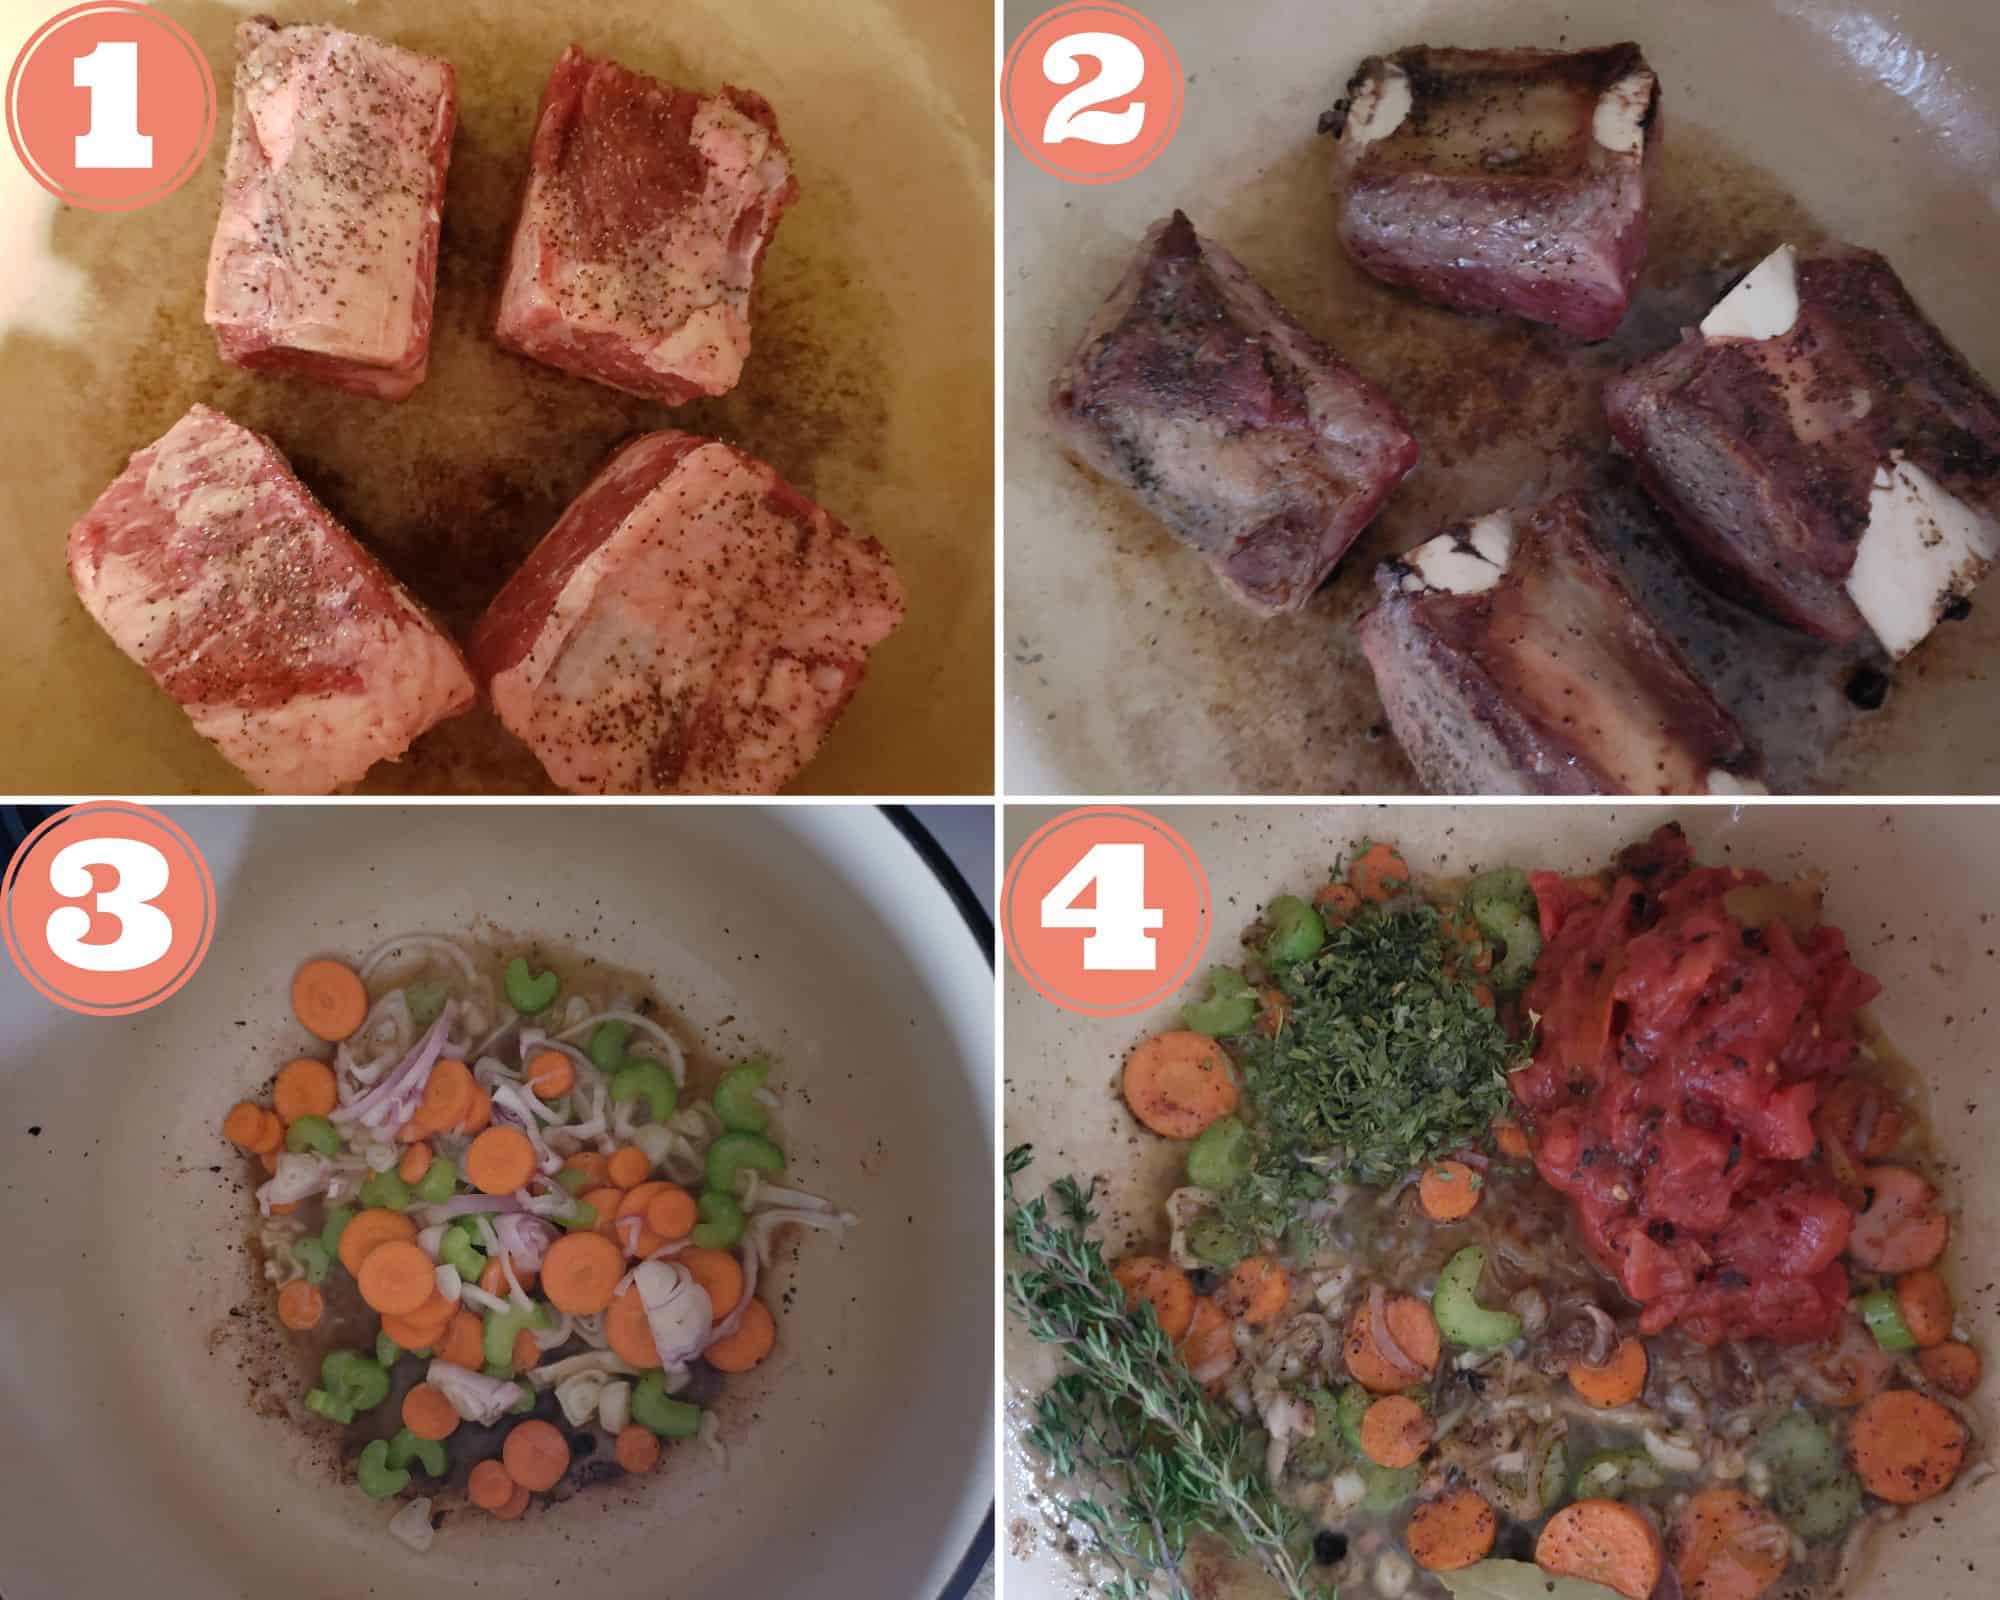 Photos showing browning the short ribs and sauteing the vegetables.